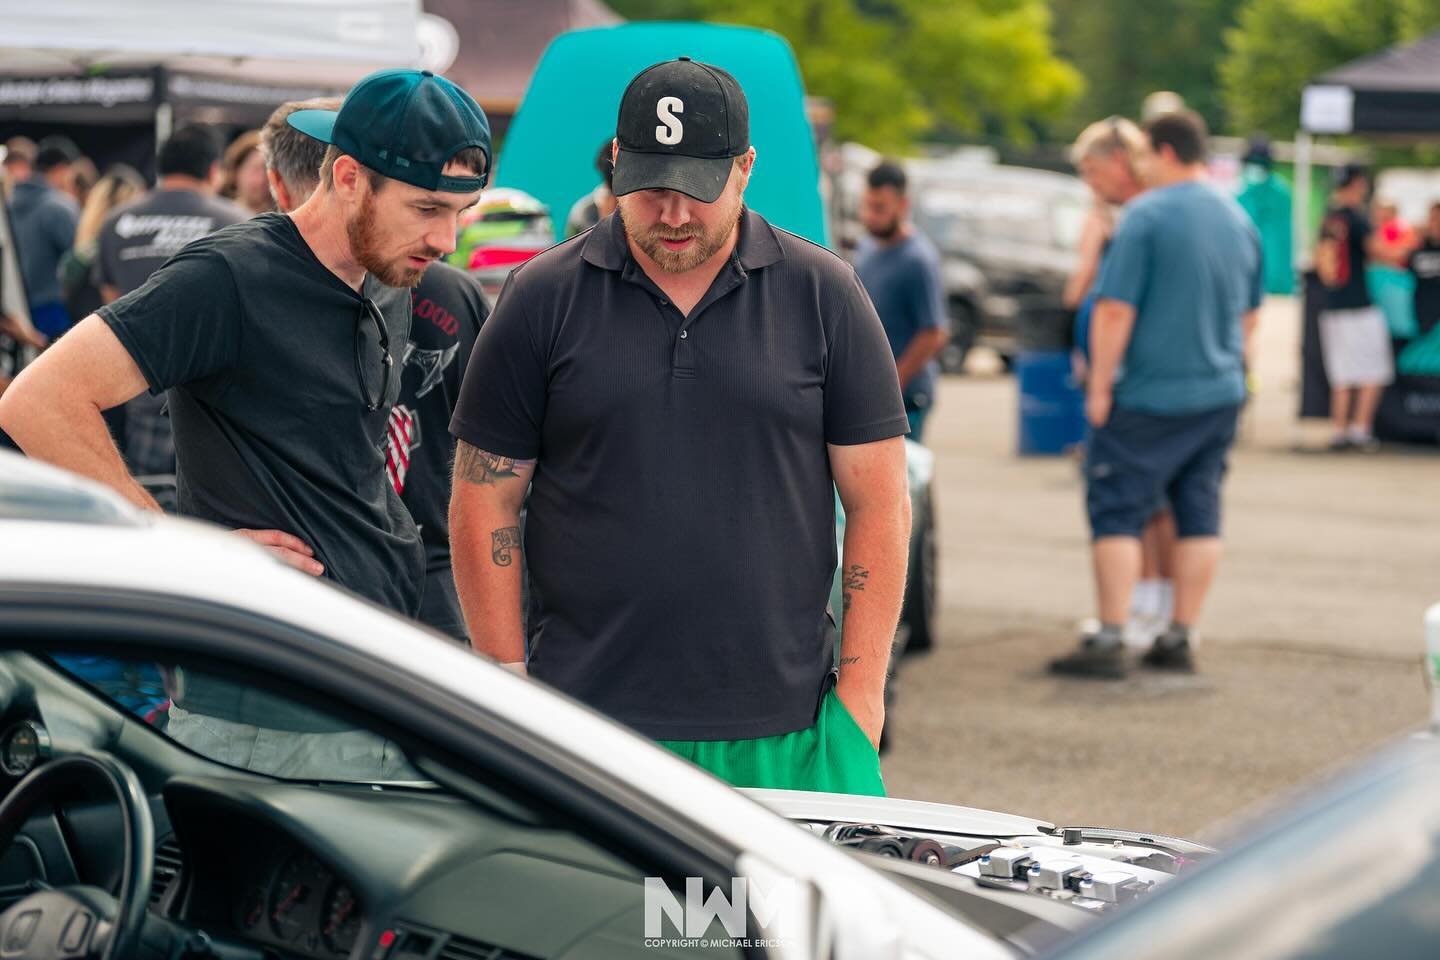 We can&rsquo;t wait to celebrate @hondafestnw&rsquo;s 10 year anniversary on July 28th! We look forward to you guys joining us!

Car show registration opens TONIGHT at 9pm! Spread the word to your friends!

📷: @me.cap